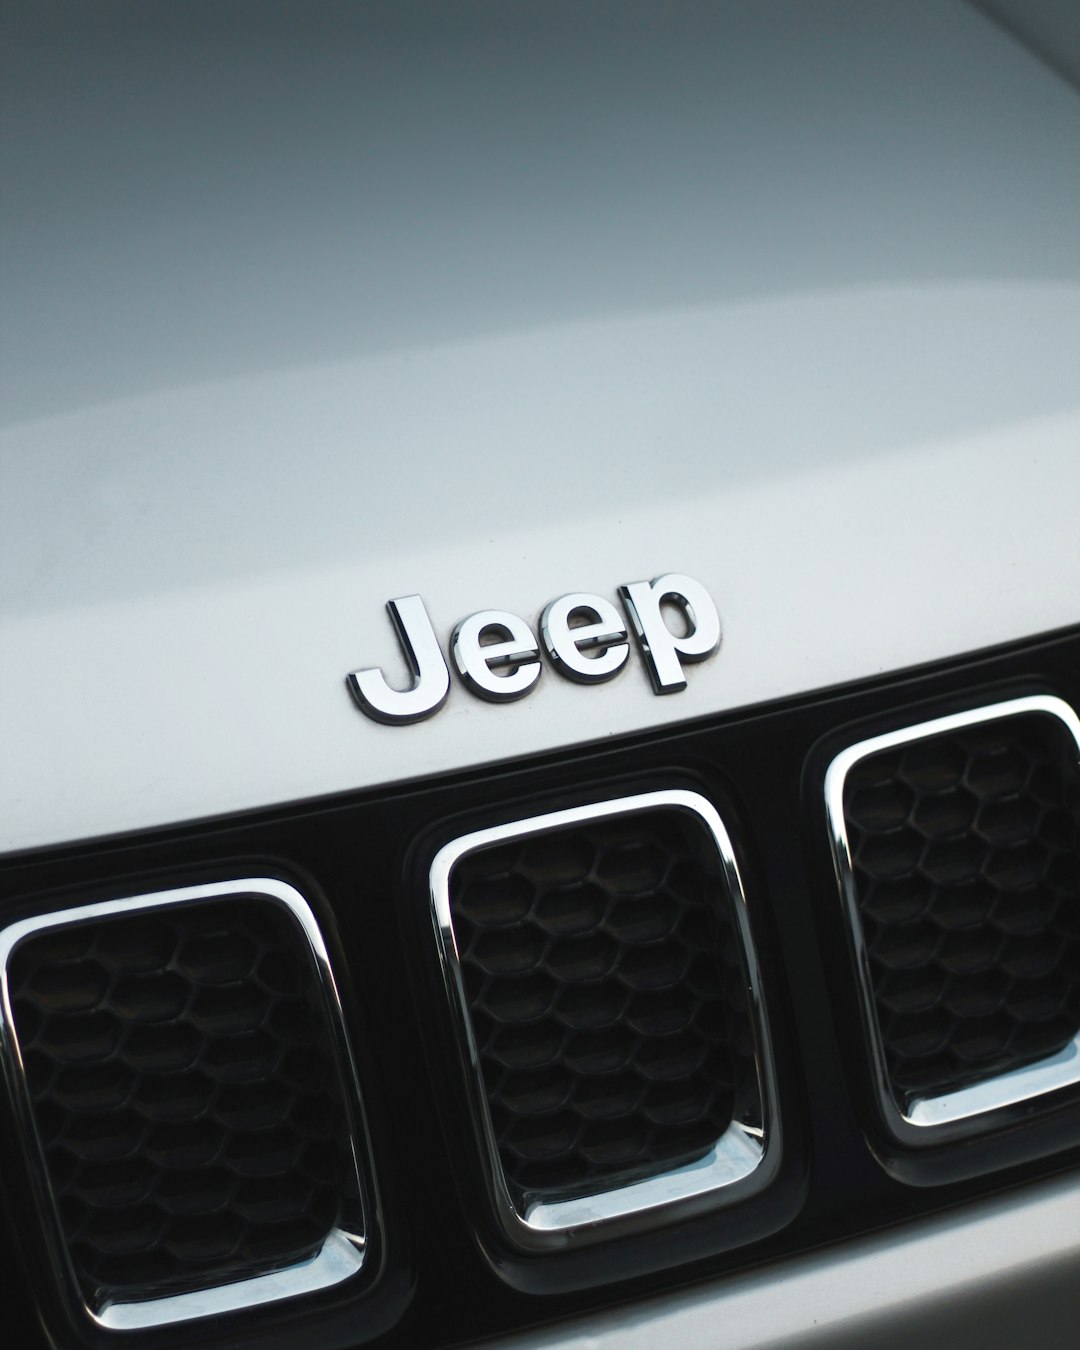 The Jeep Wrangler is a rugged and versatile off-road vehicle known for its iconic design and exceptional performance.